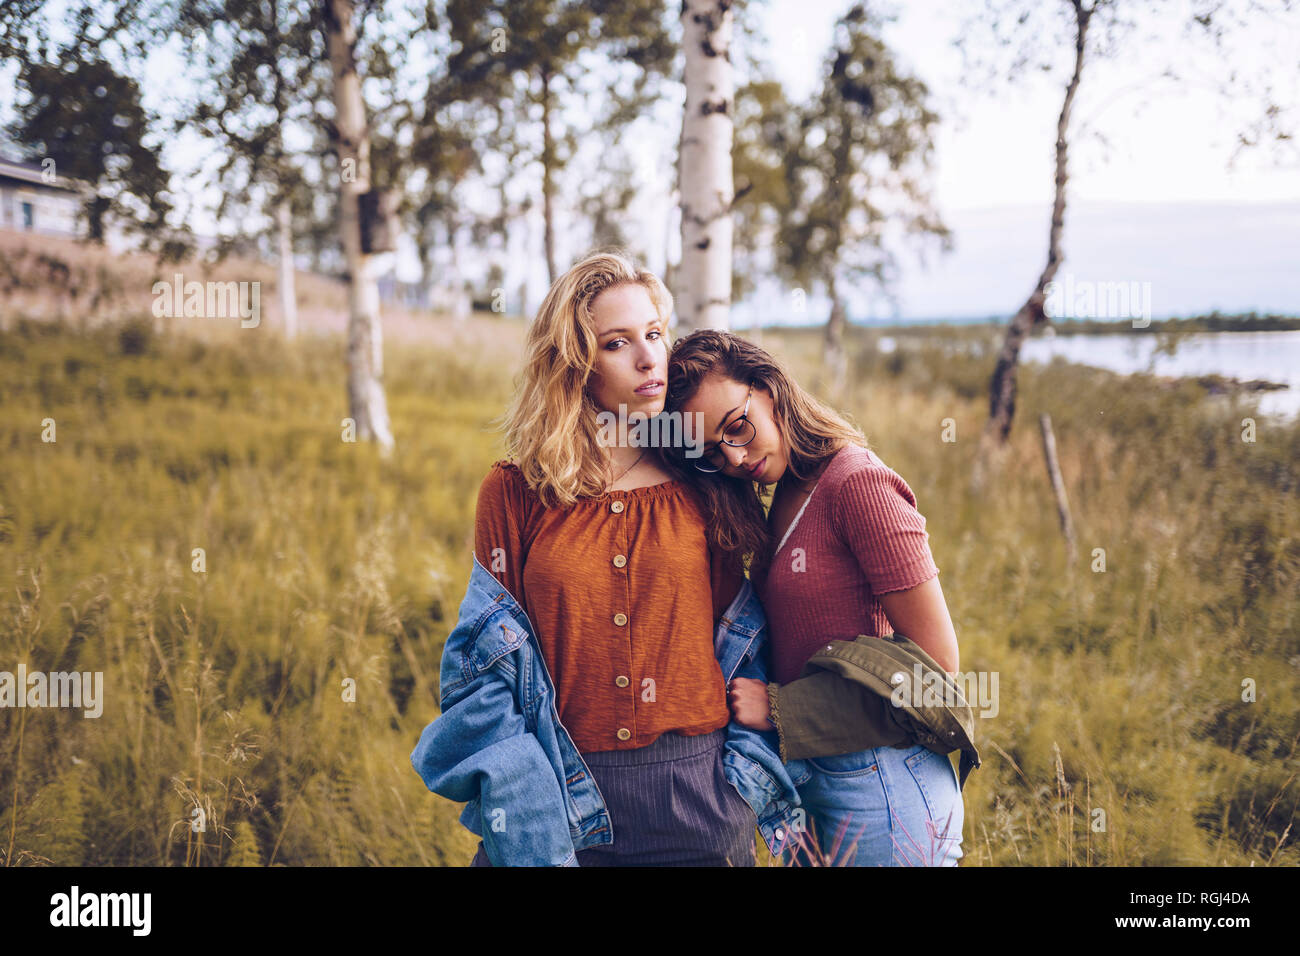 Two girl friends leaning on each other on a lakeshore Stock Photo